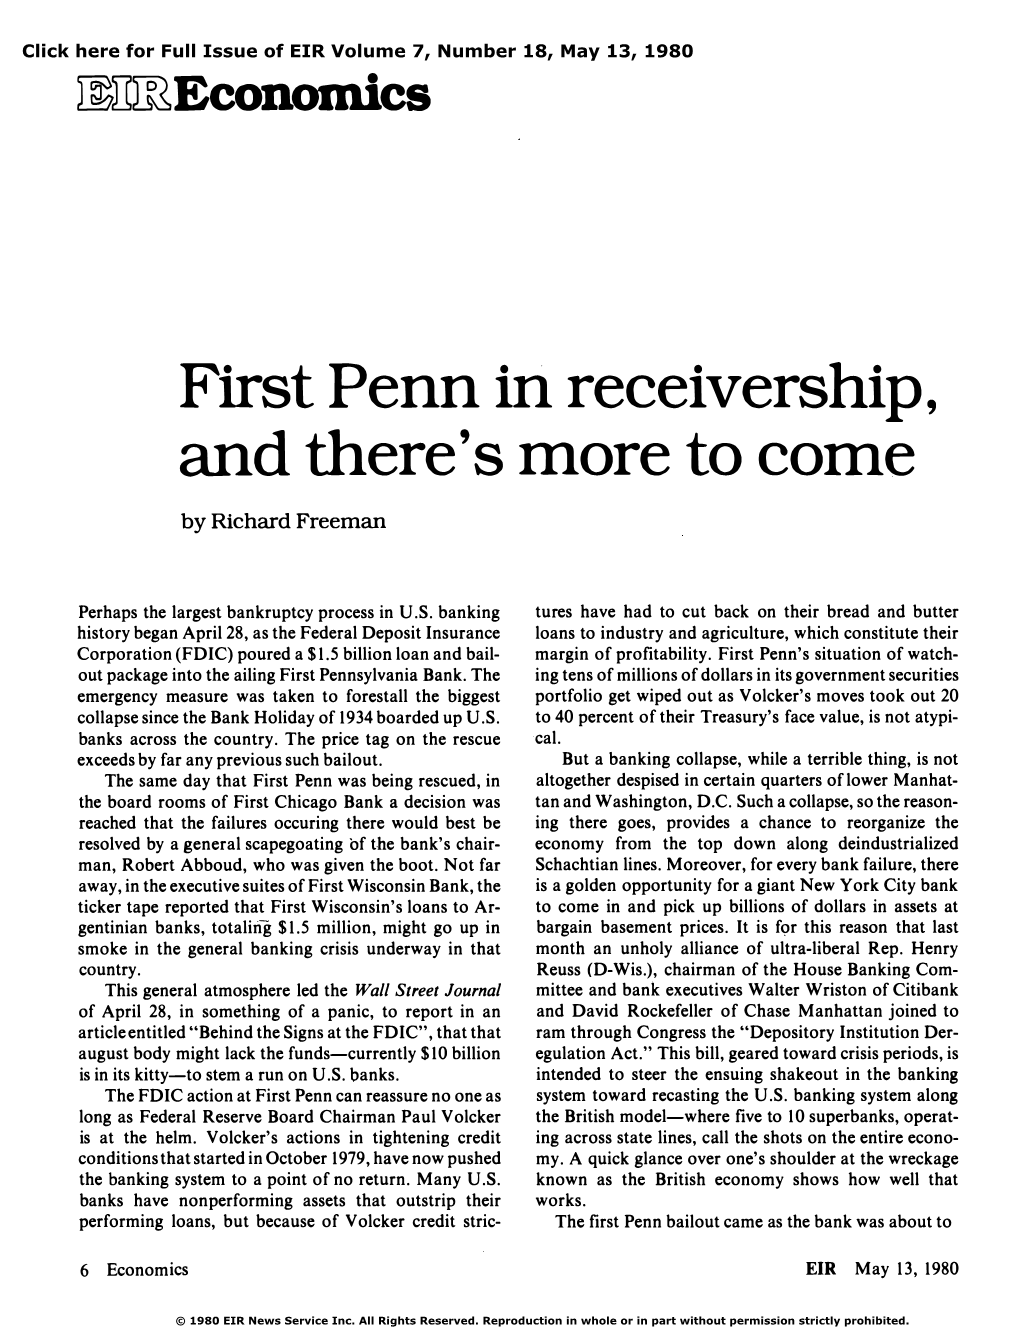 First Penn in Receivership, and There's More to Come